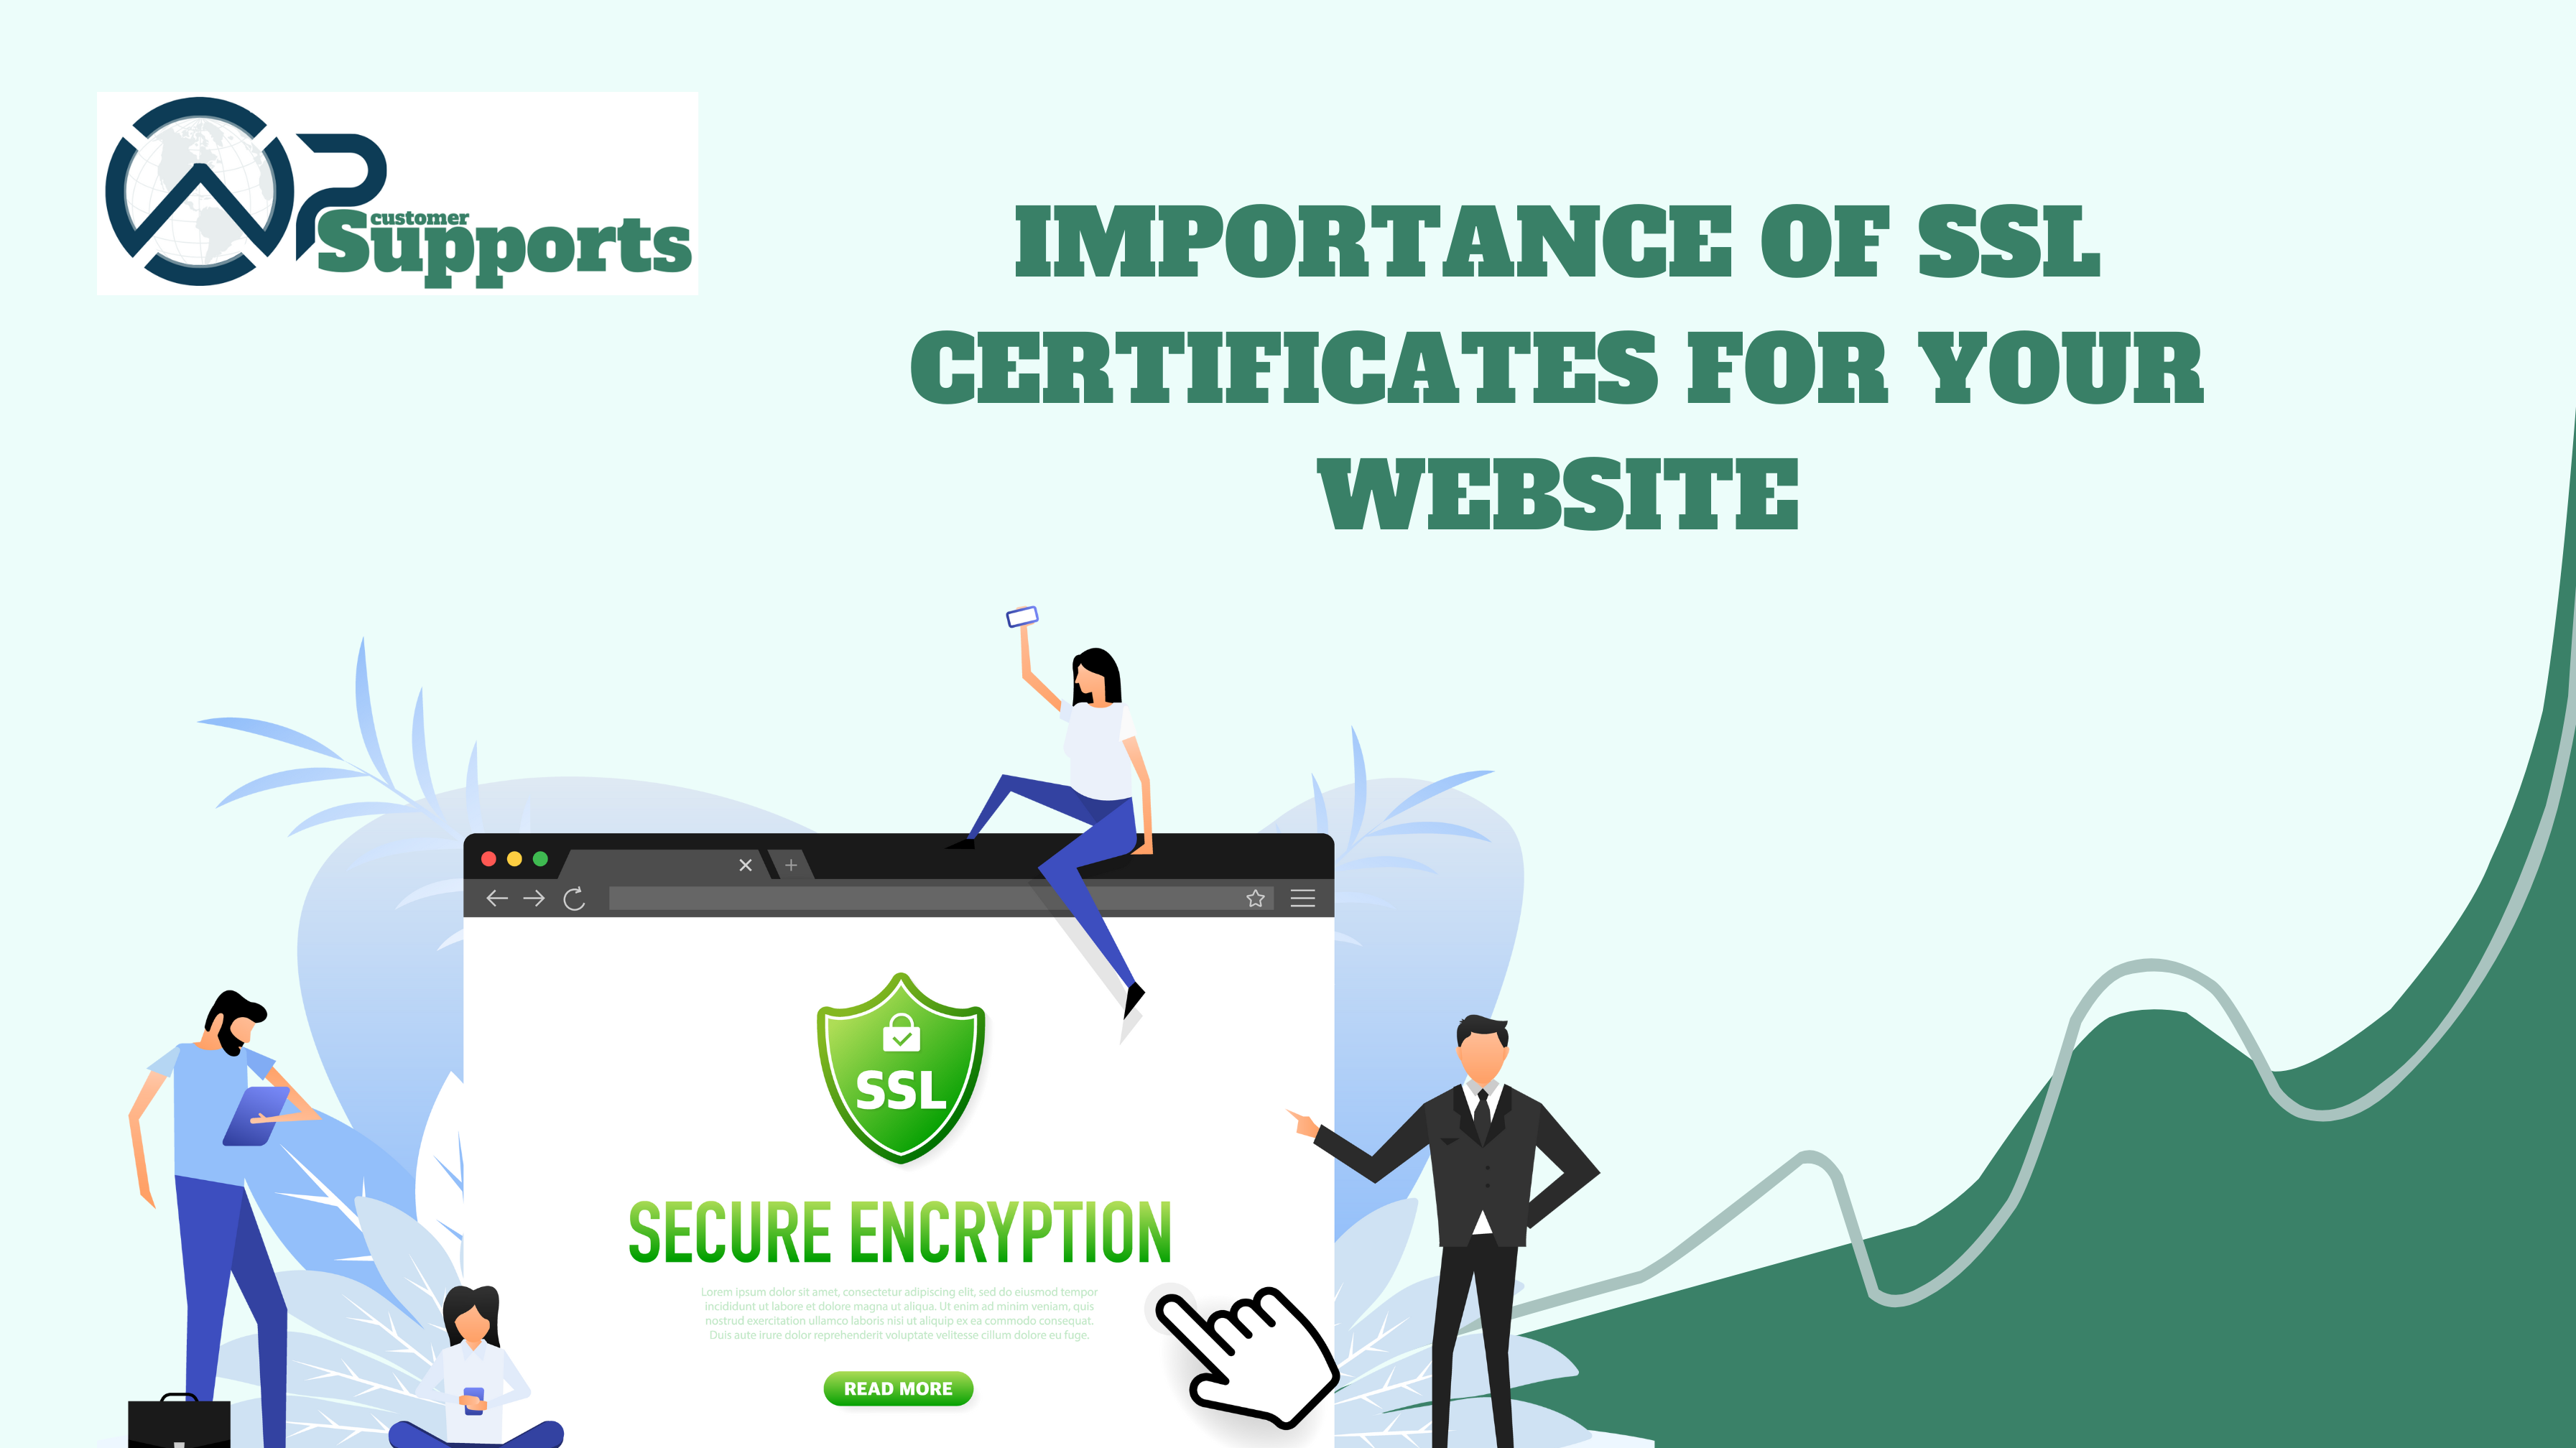 The Importance of SSL Certificates for Your Website